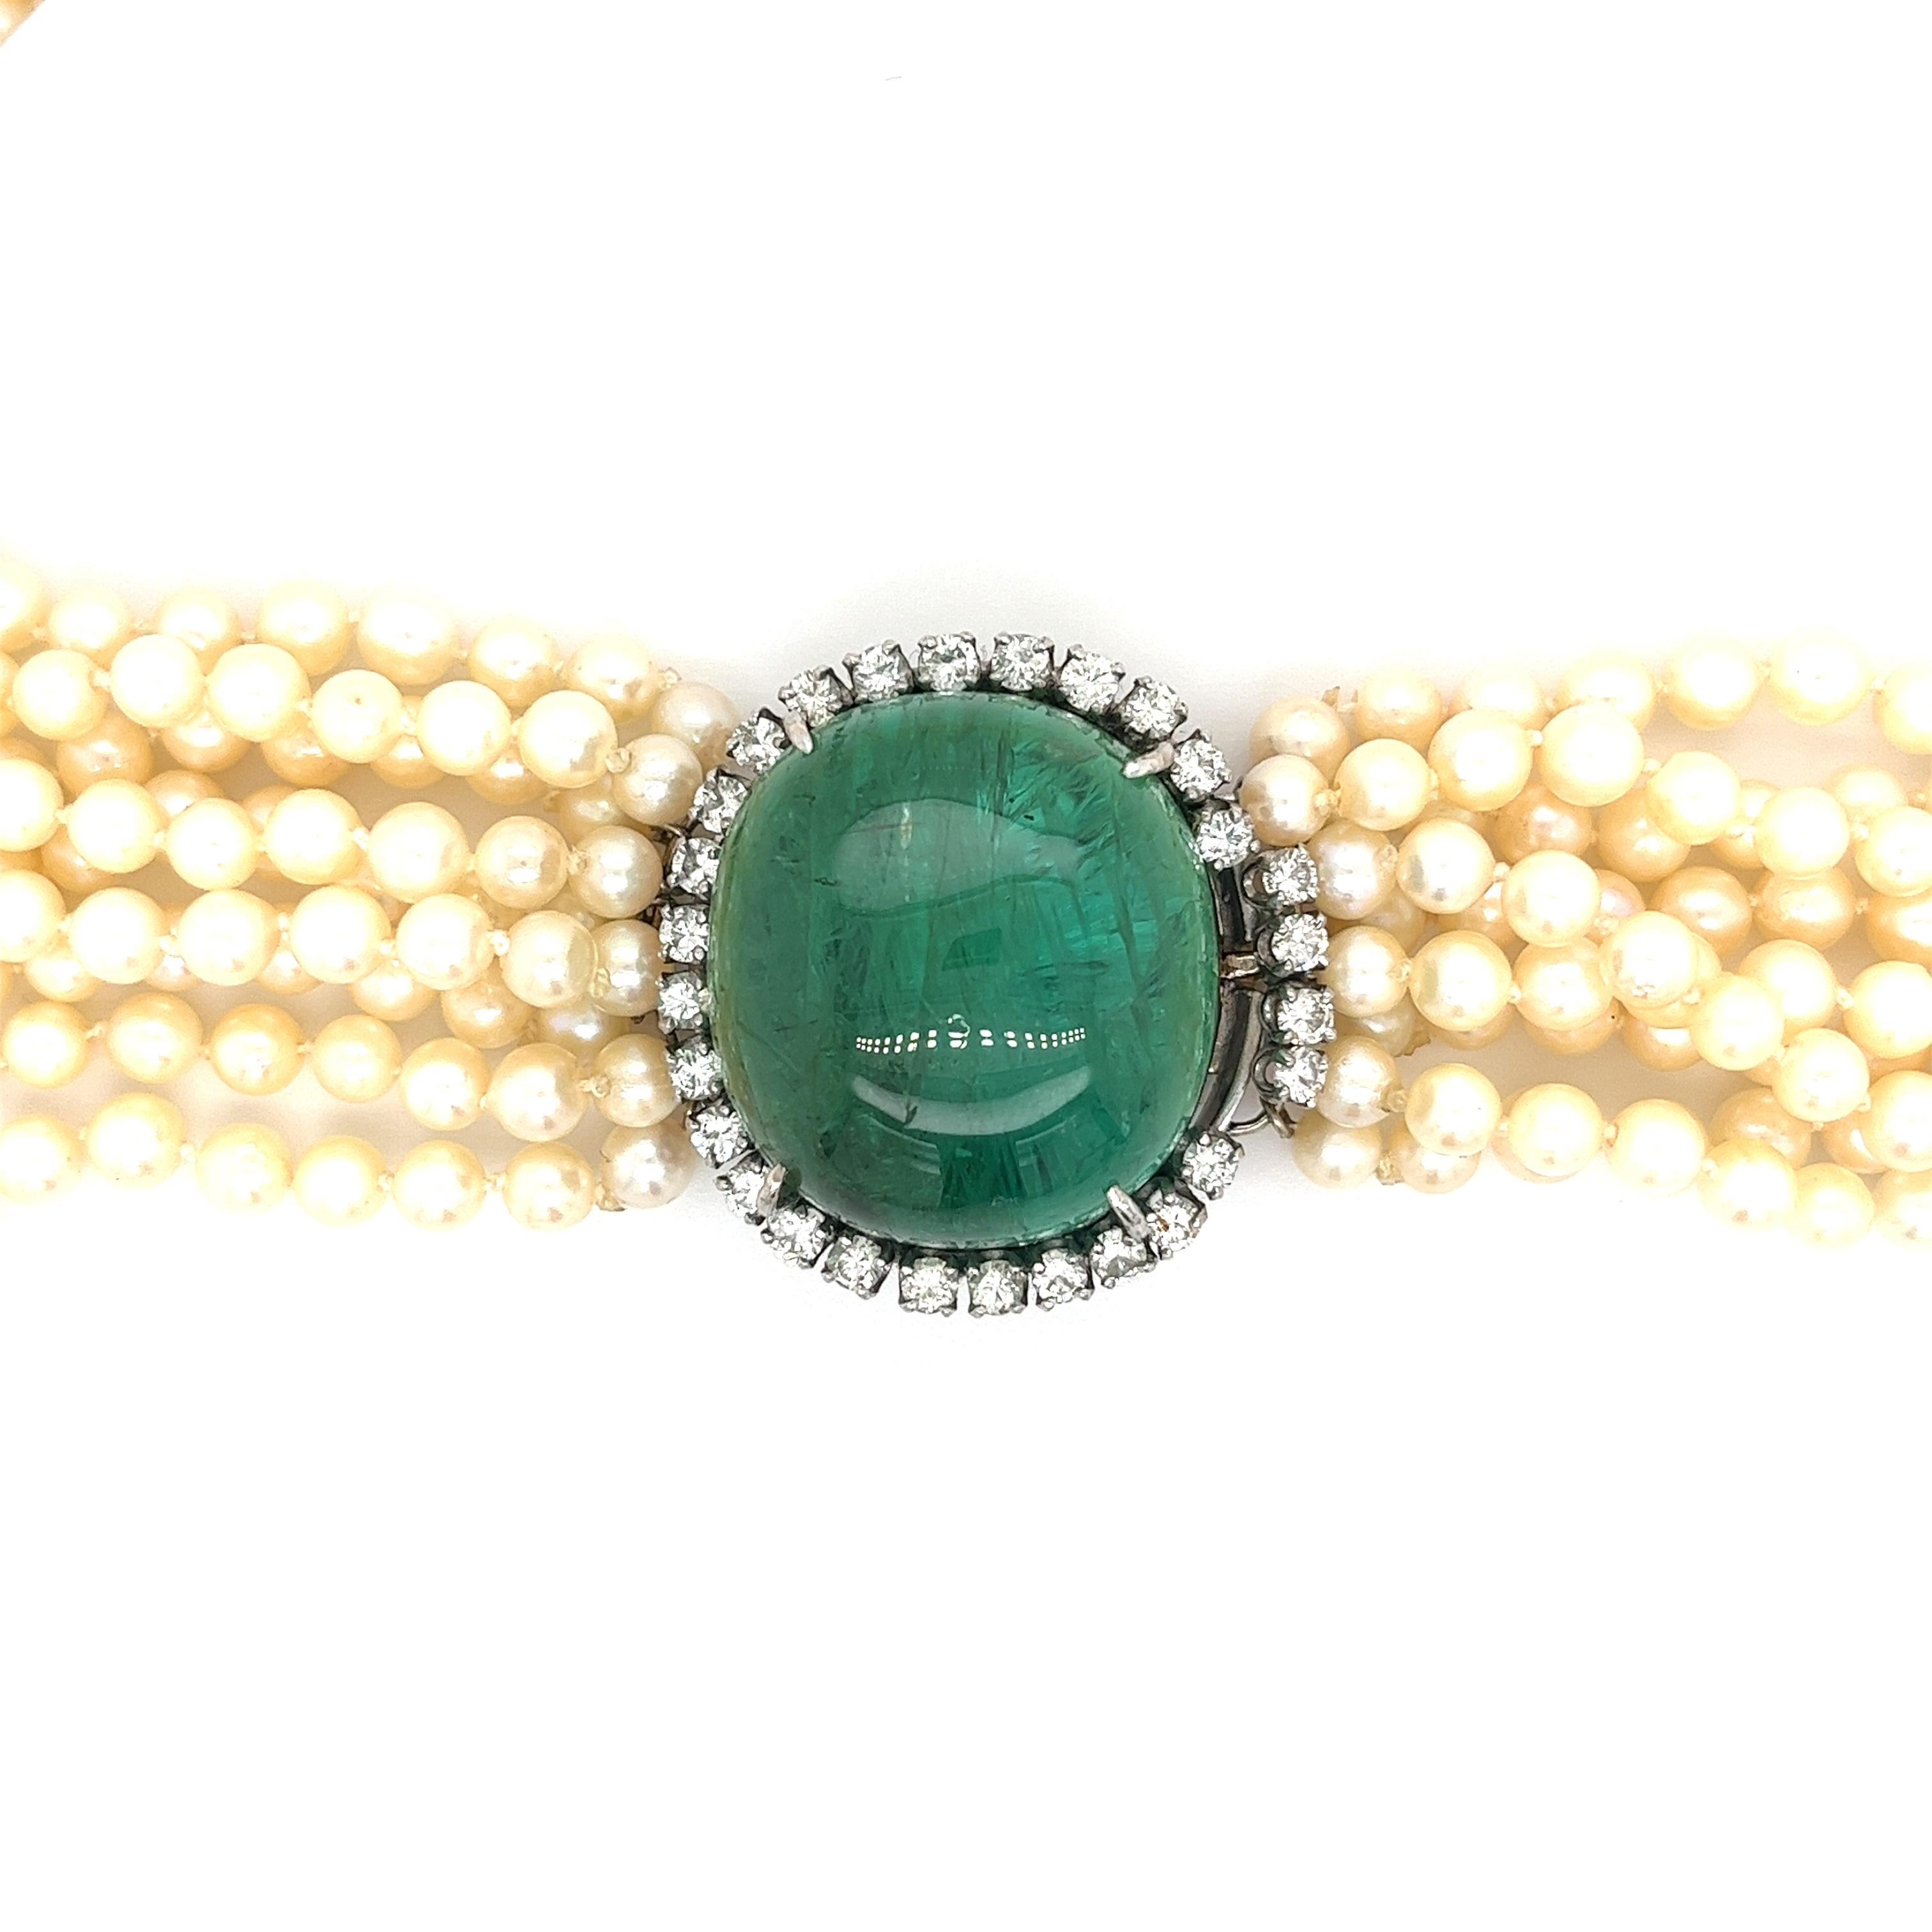 Cabochon cut South American Emerald and Diamond Halo ladies necklace. Vintage circa 1970, with a modernist Retro & Art Deco era inspiration. The perfect heirloom vintage statement piece for special occasions. 

Necklace Details: 
✔ Metal: 14k White